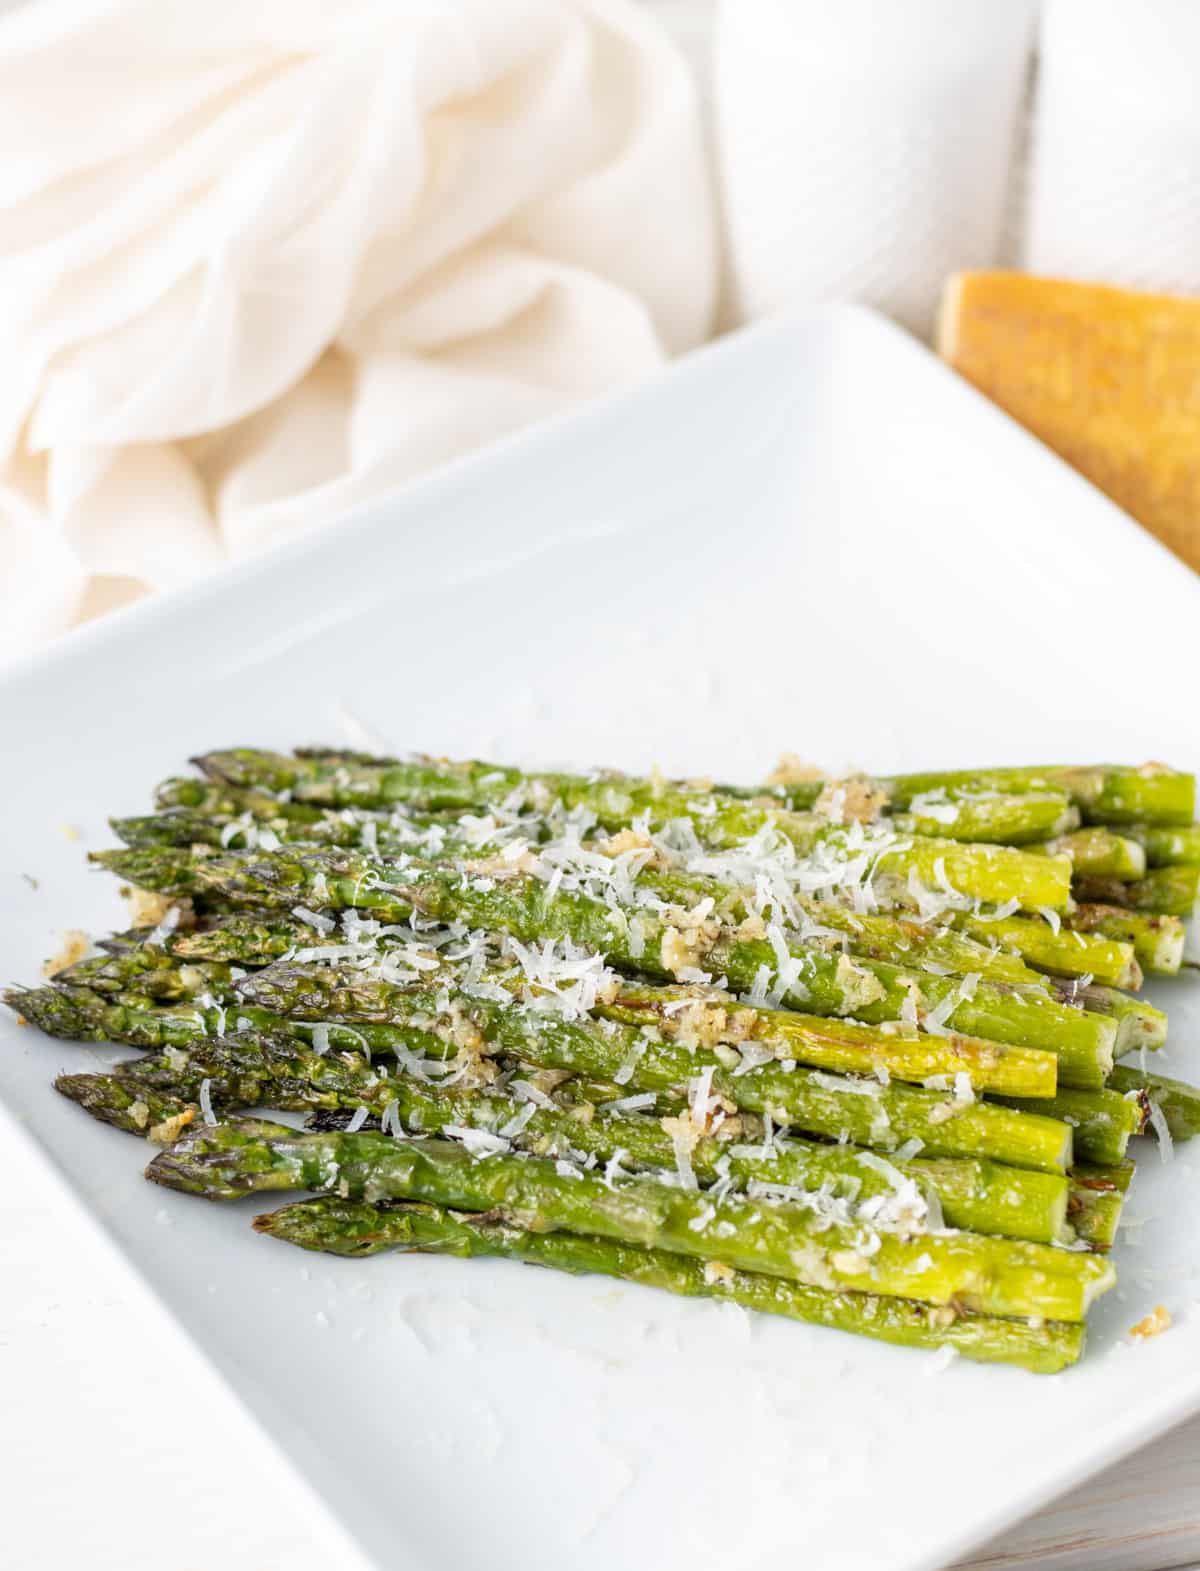 Asparagus topped with parmesan on a plate.